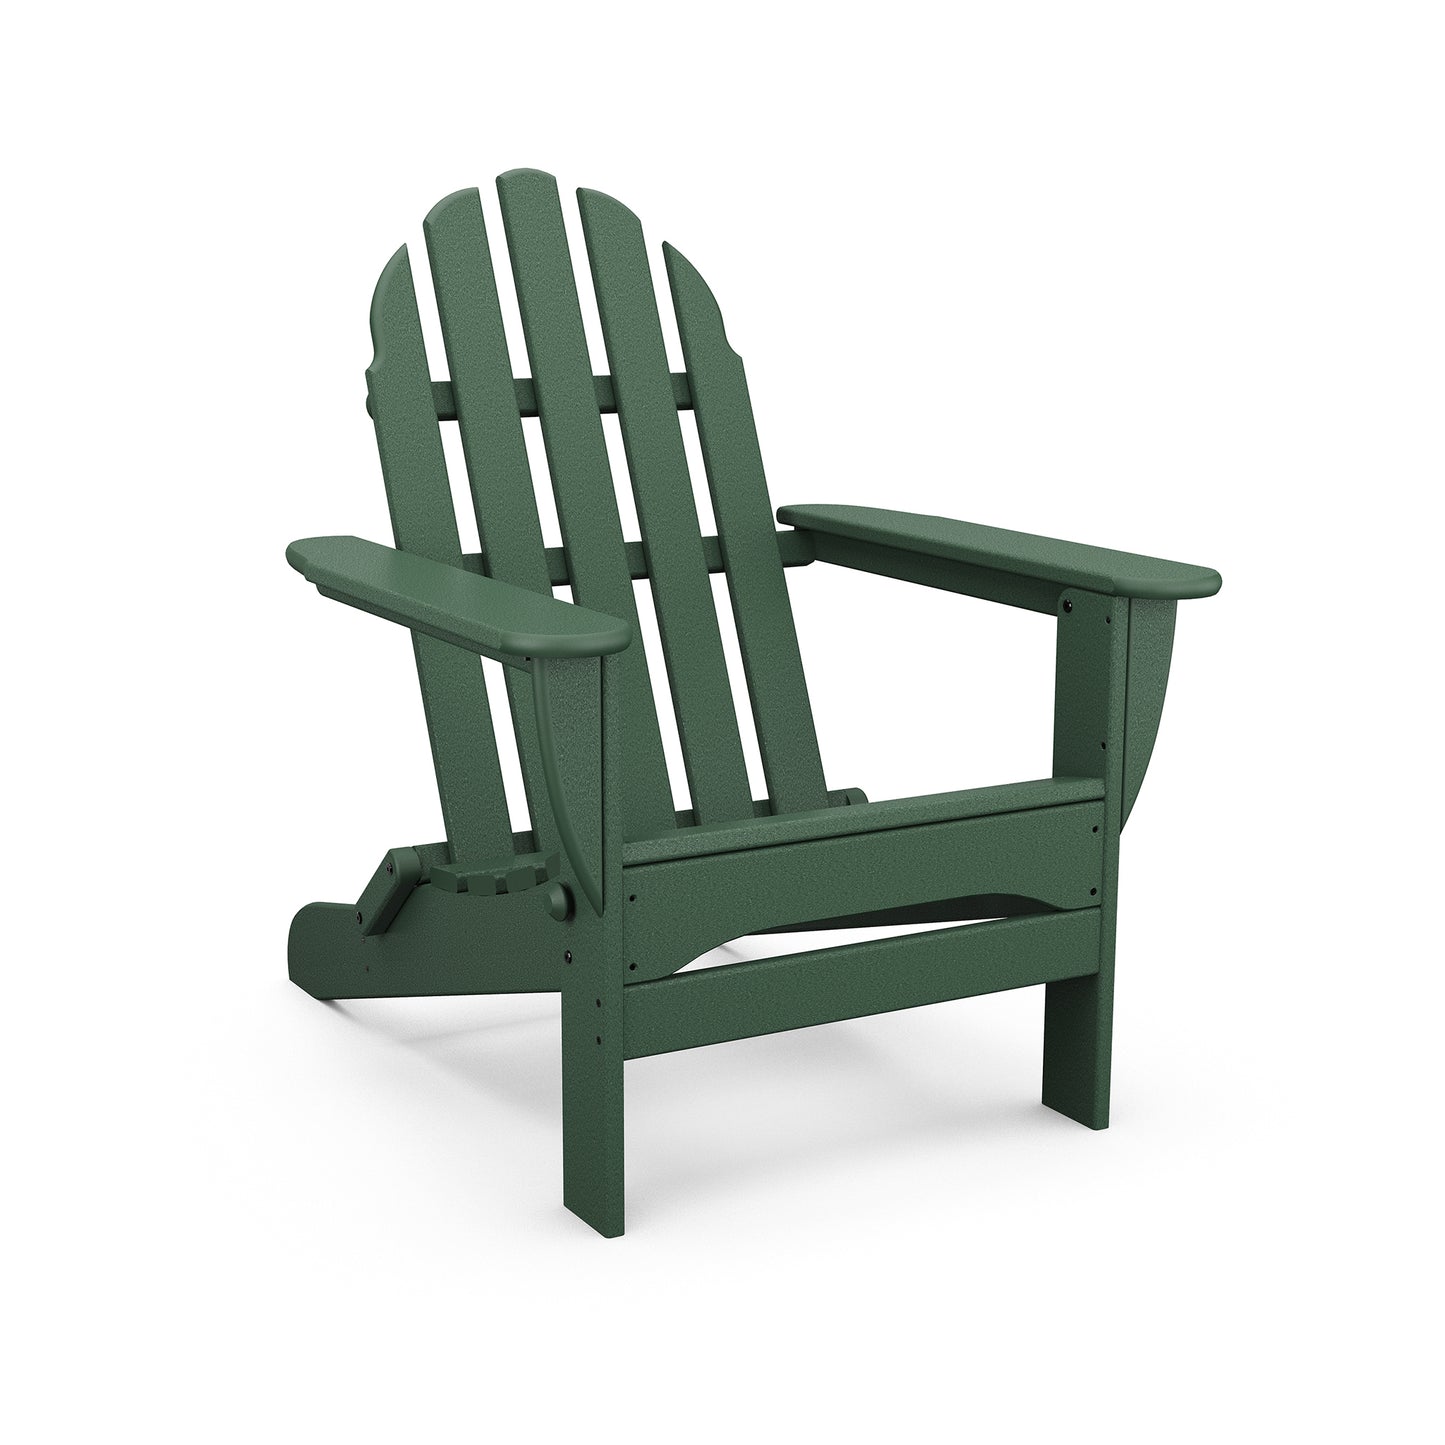 A dark green POLYWOOD Classic Folding Adirondack chair isolated on a white background, featuring a slatted back and seat with wide armrests.